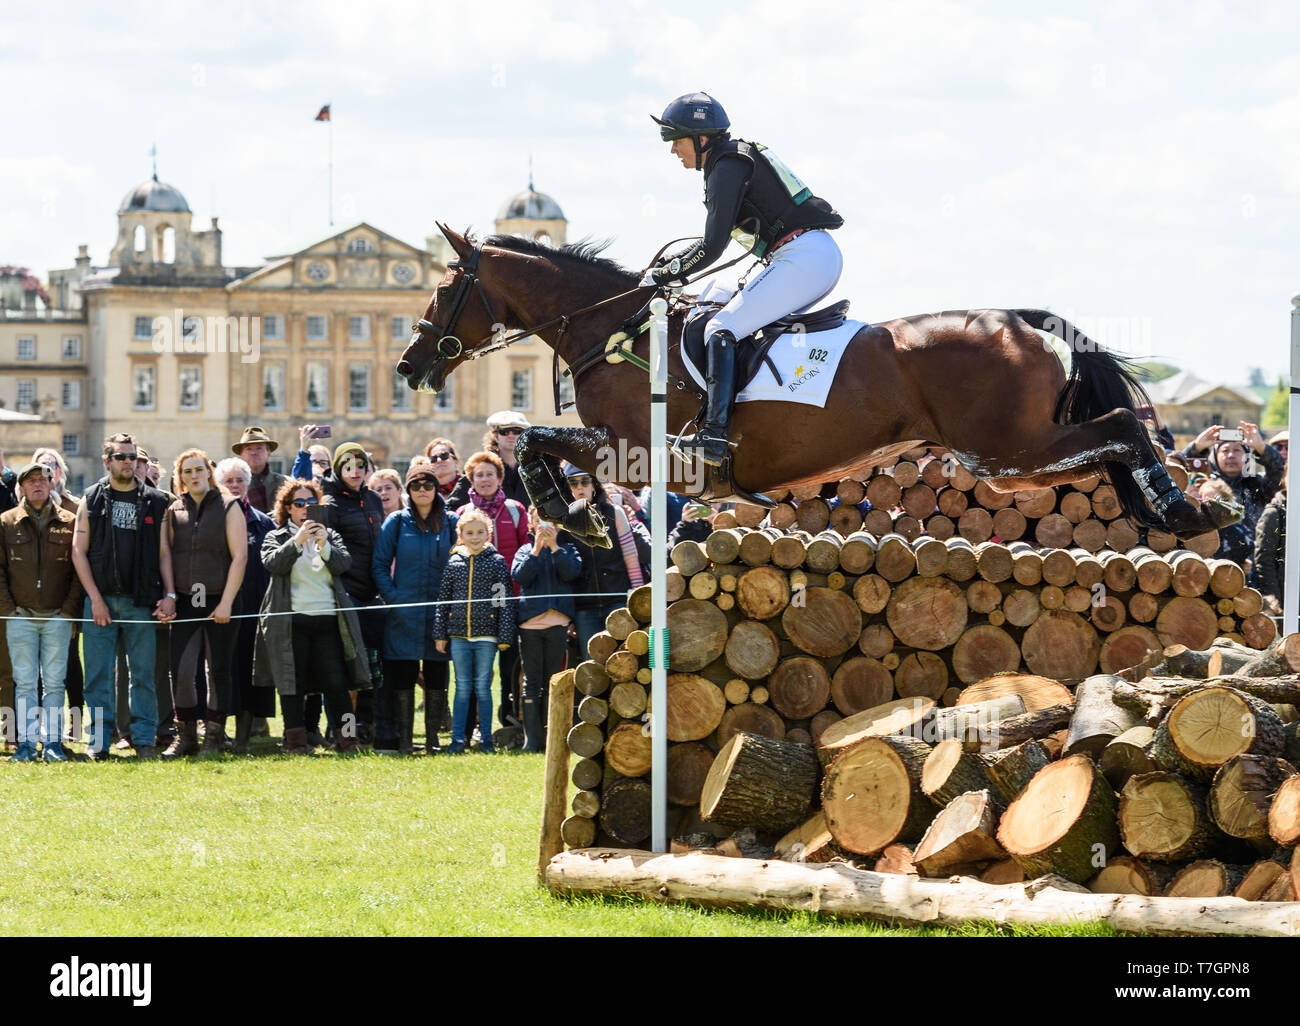 Piggy French and VANIR KAMIRA during the cross country phase of the Mitsubishi Motors Badminton Horse Trials, May 2019 Stock Photo